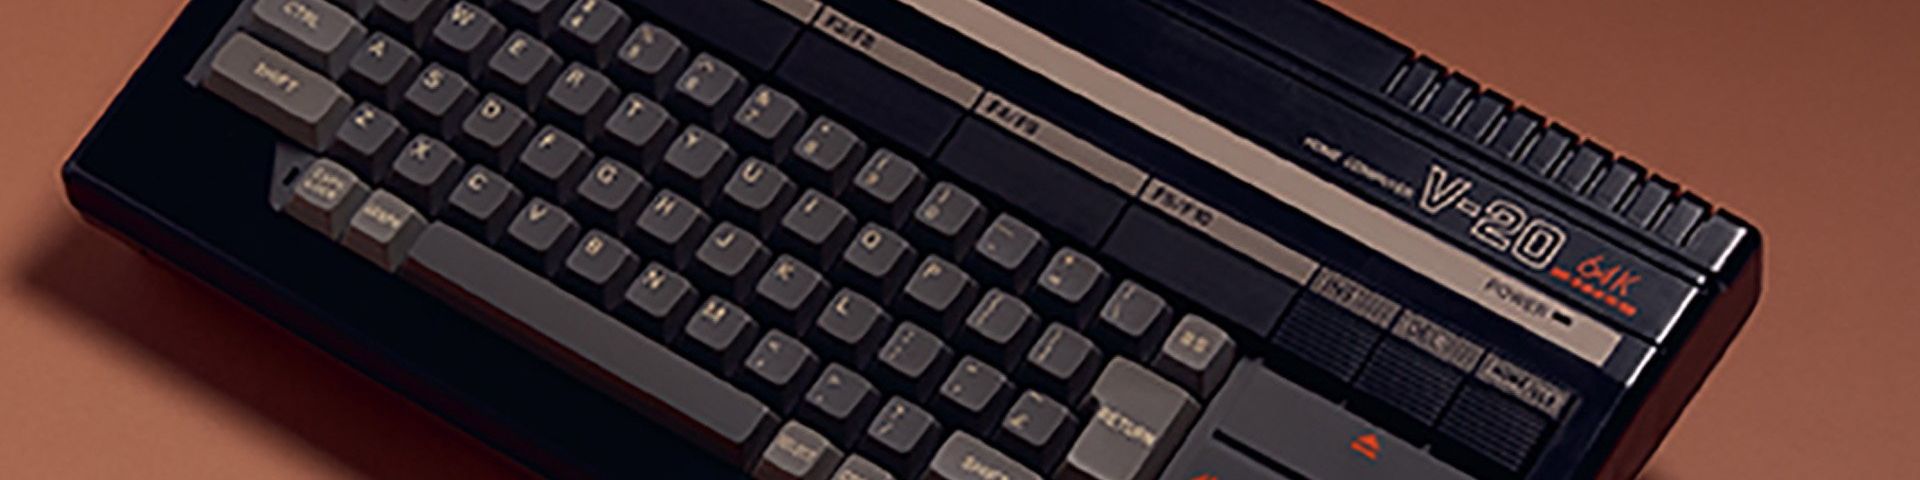 A close up of the Canon V-20 home computer, showing the text HOME COMPUTER V-20 65K, the power indicator and F keys. Image courtesy of Thames and Hudson